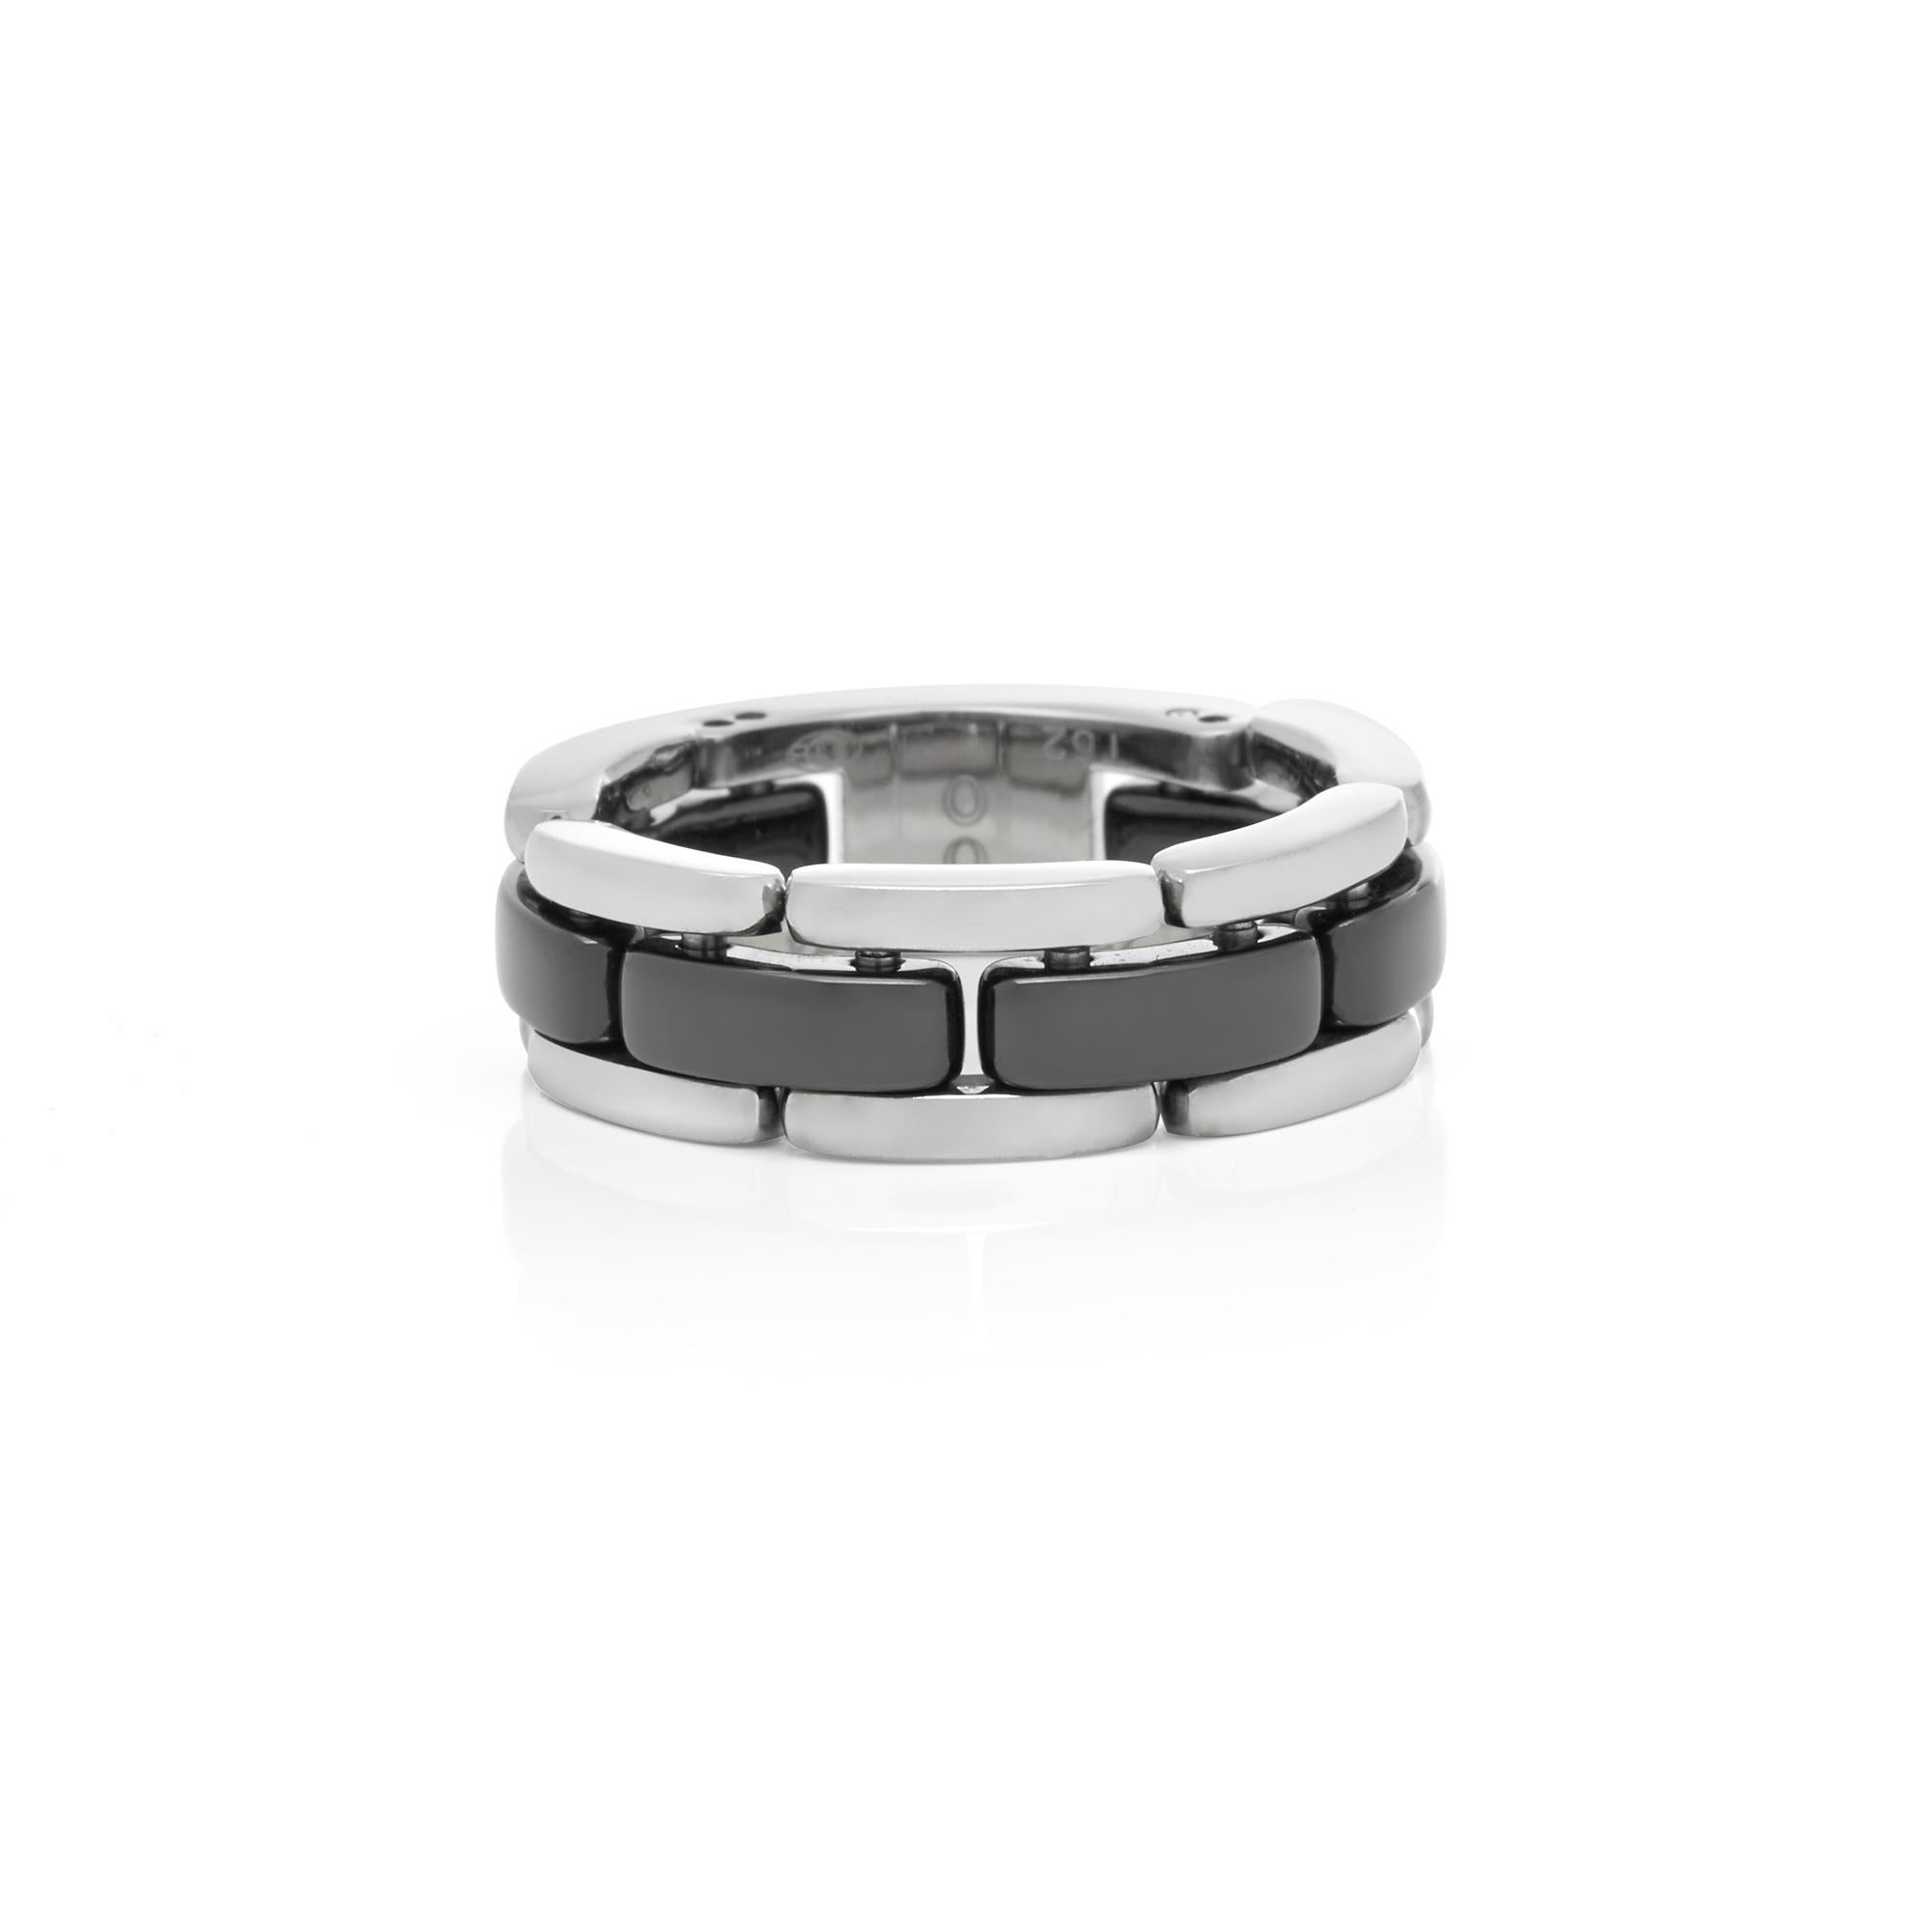 This Ring by Chanel is from their Ultra collection and features black Ceramic in a flexible 18k White Gold band. The Ring sizes are UK S 1/2, EU 61 and US 9 3/4. This Ring cannot be resized. Complete with Chanel Box. 
